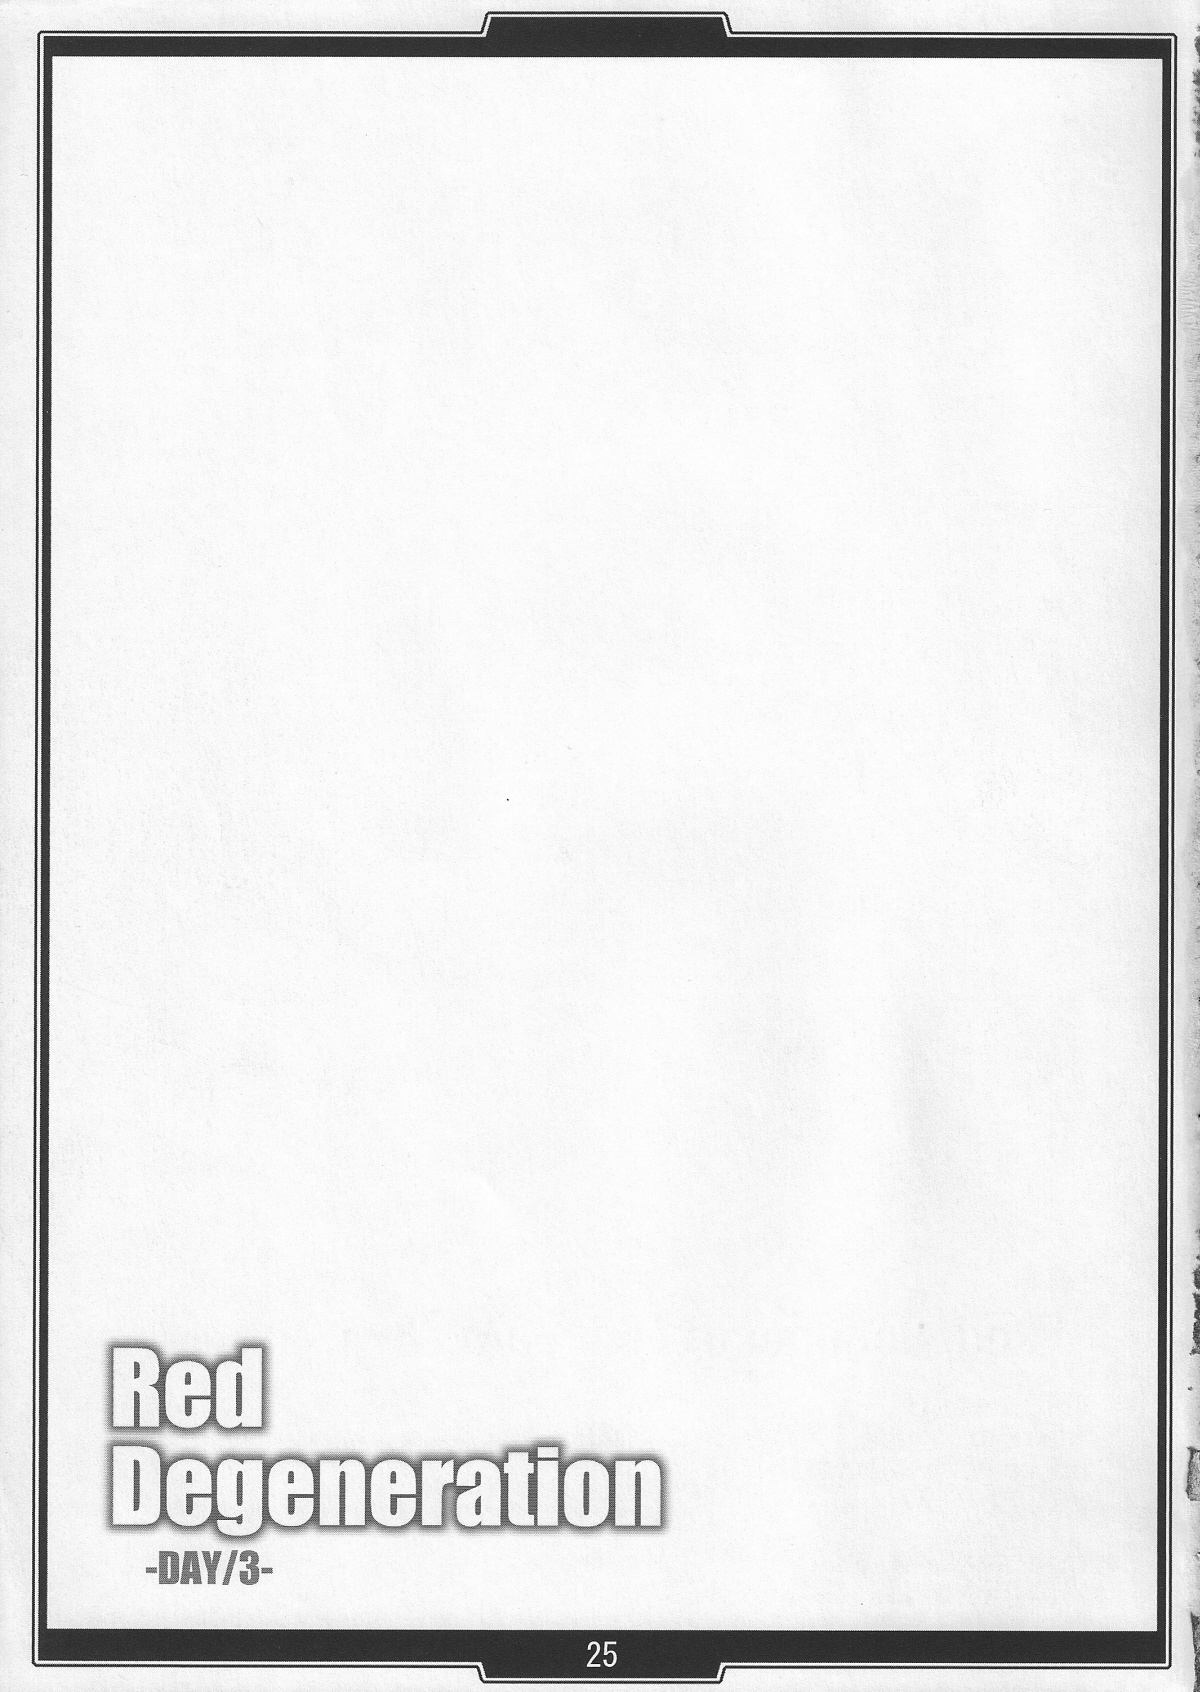 (COMIC1☆2) [H.B (B-RIVER)] Red Degeneration -DAY/3- (Fate/stay night) page 24 full